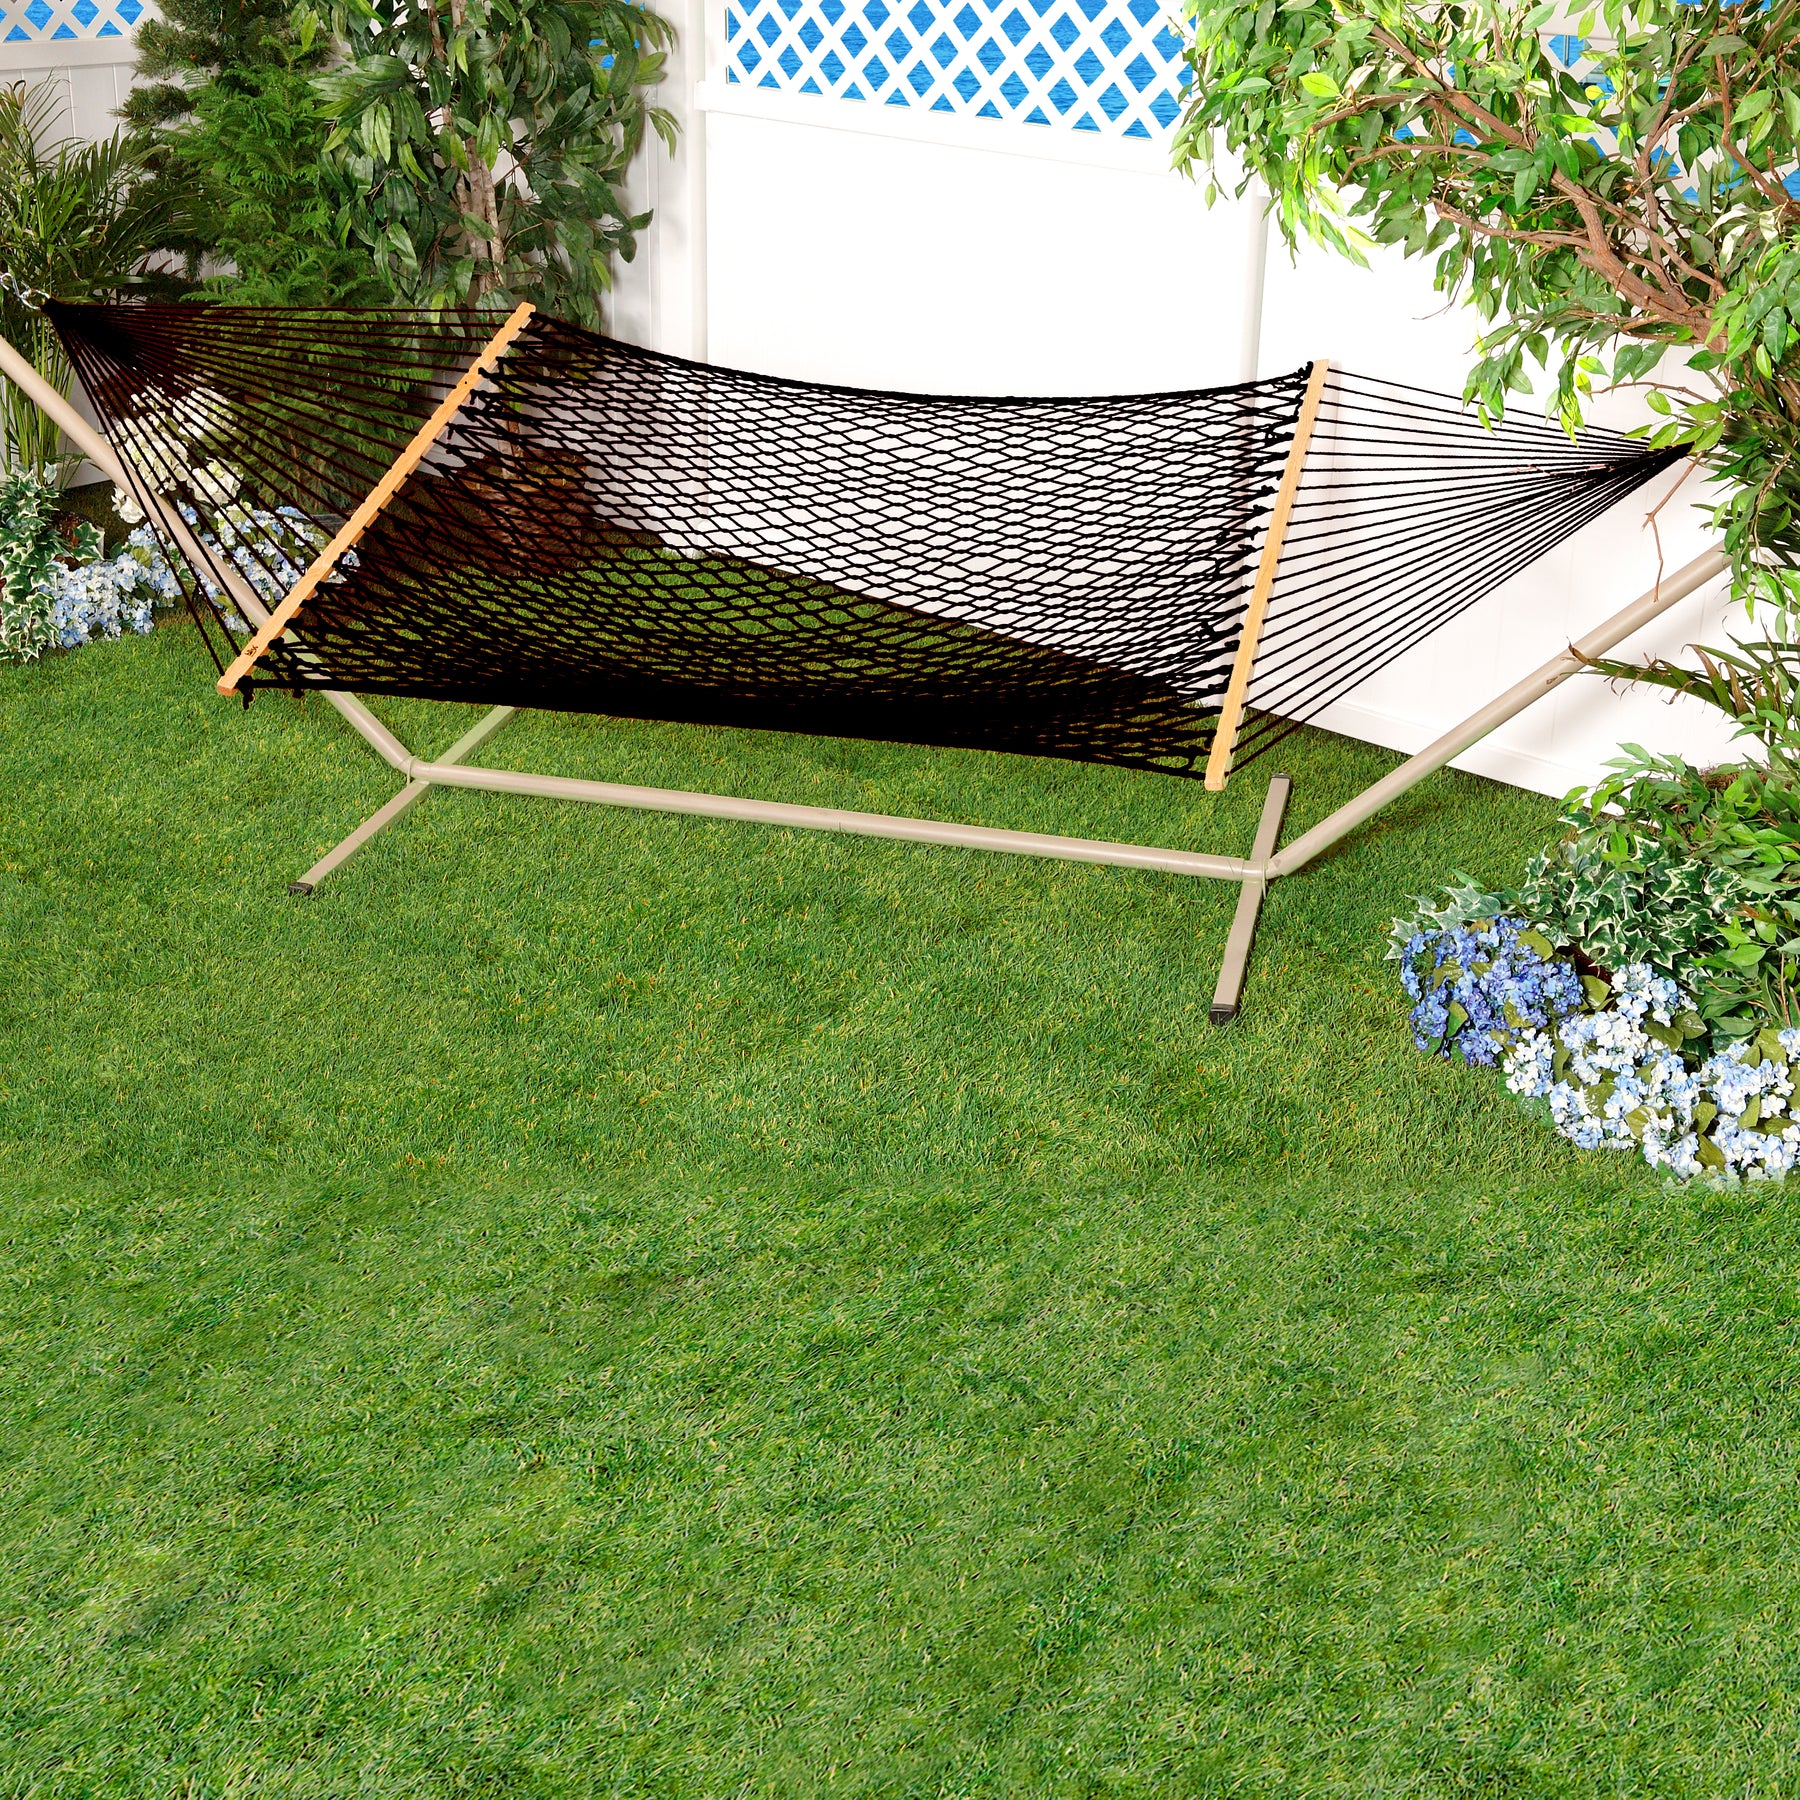 Black Variation of Bliss Hammocks 60-inch Wide Cotton Rope Hammock with a stand in a yard by some flowers and a fence.